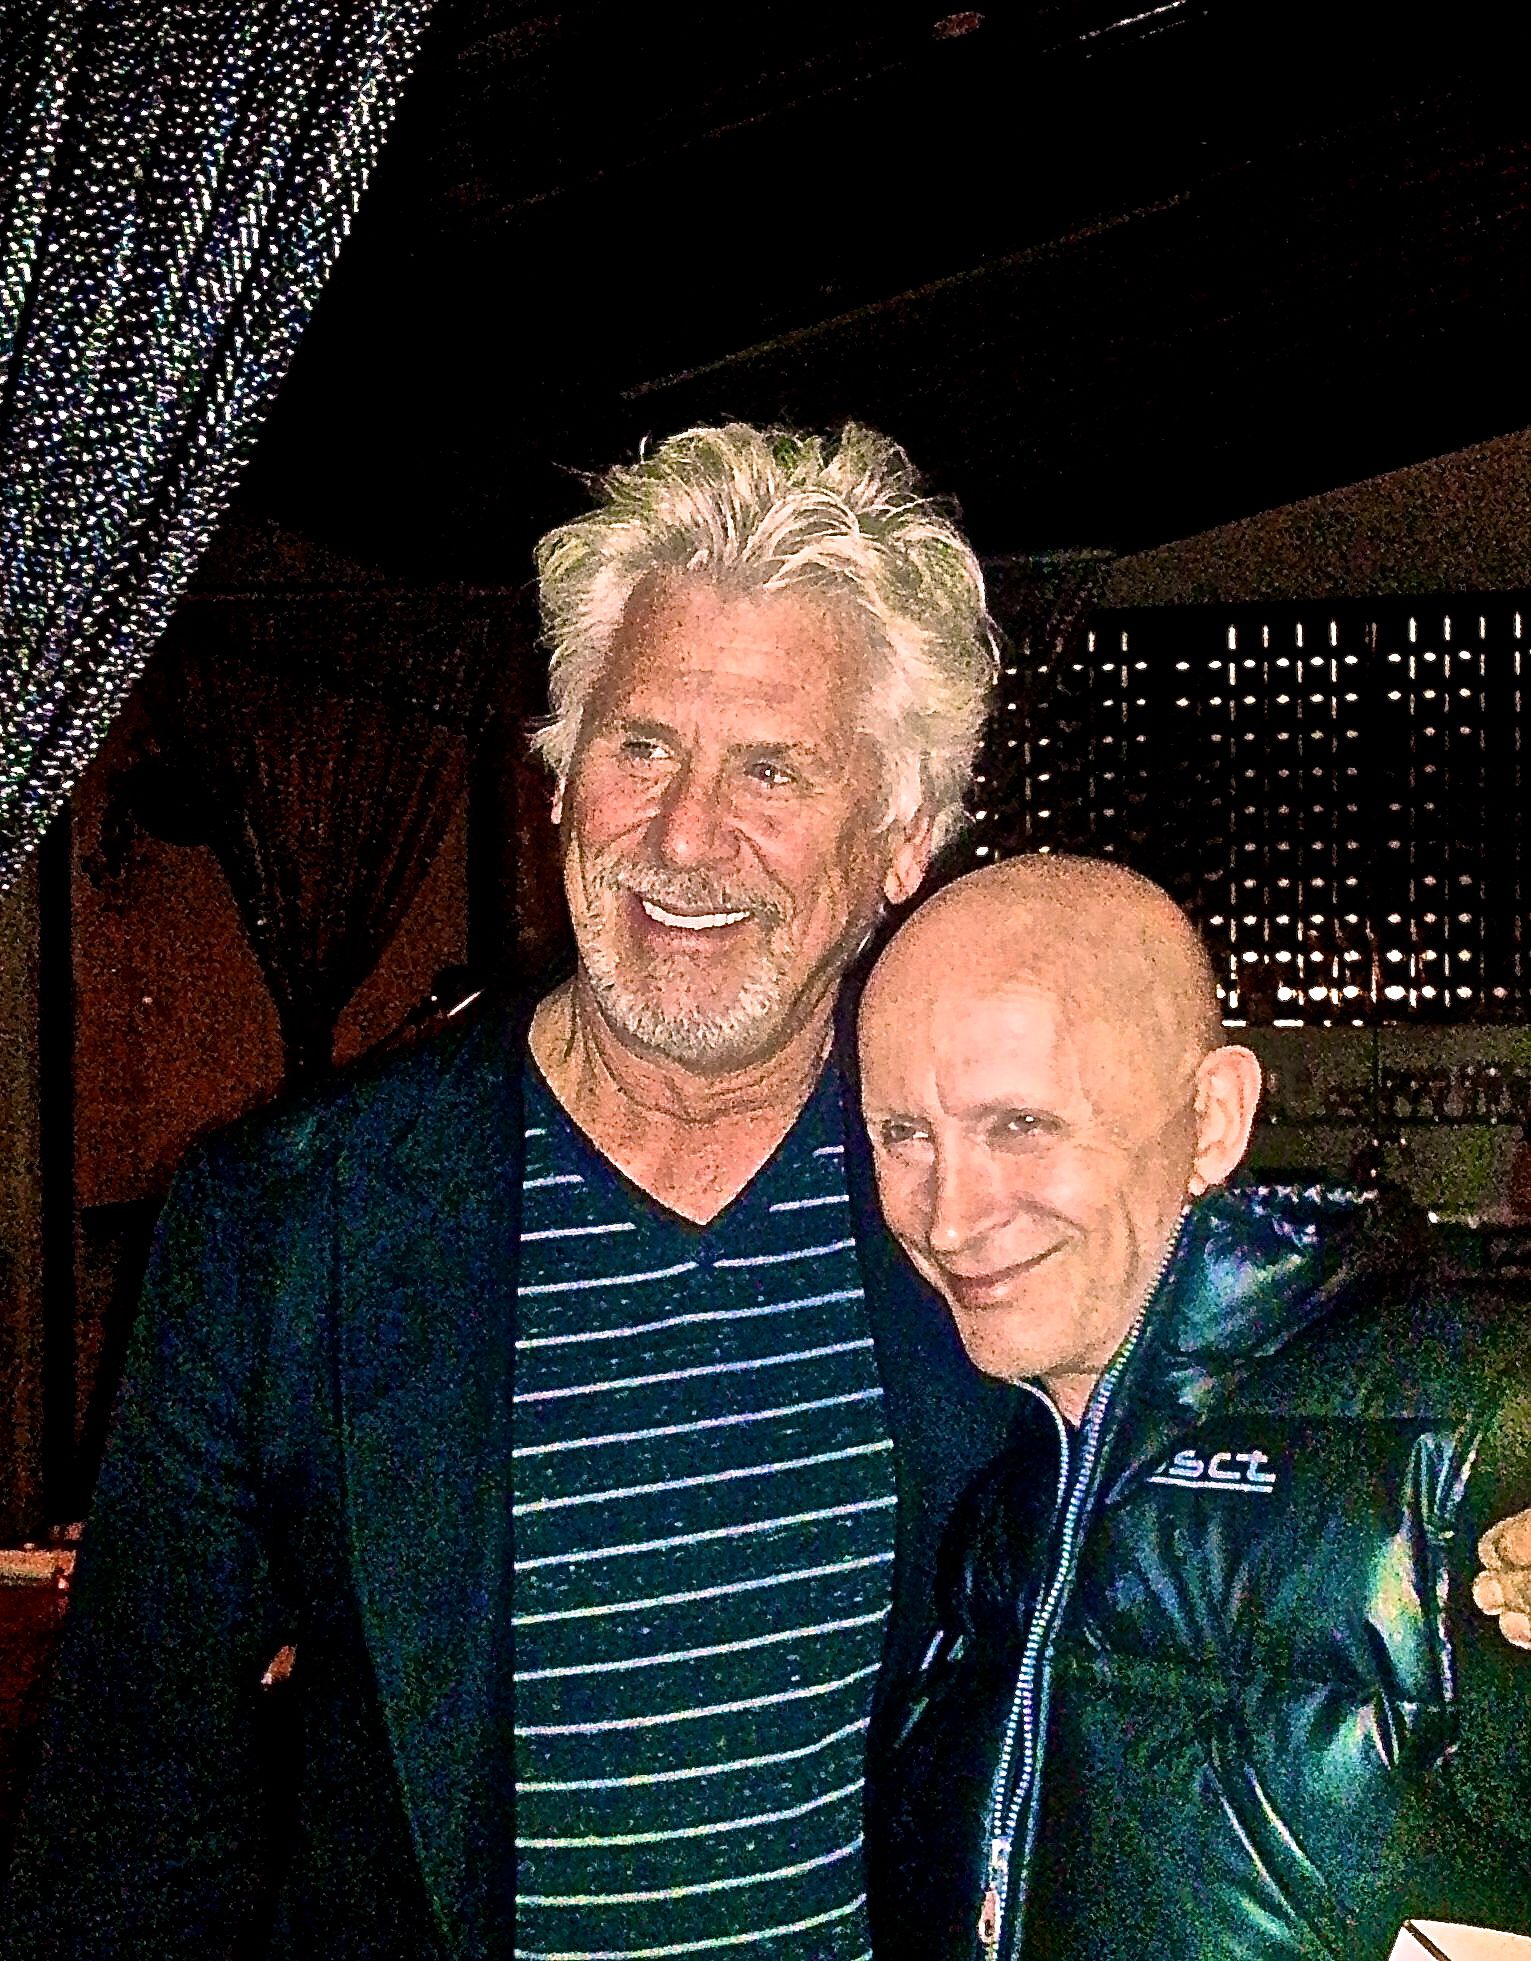 barry bostwick and richard o'brien at ROCKY HORROR PICTURE SHOW screening 2014